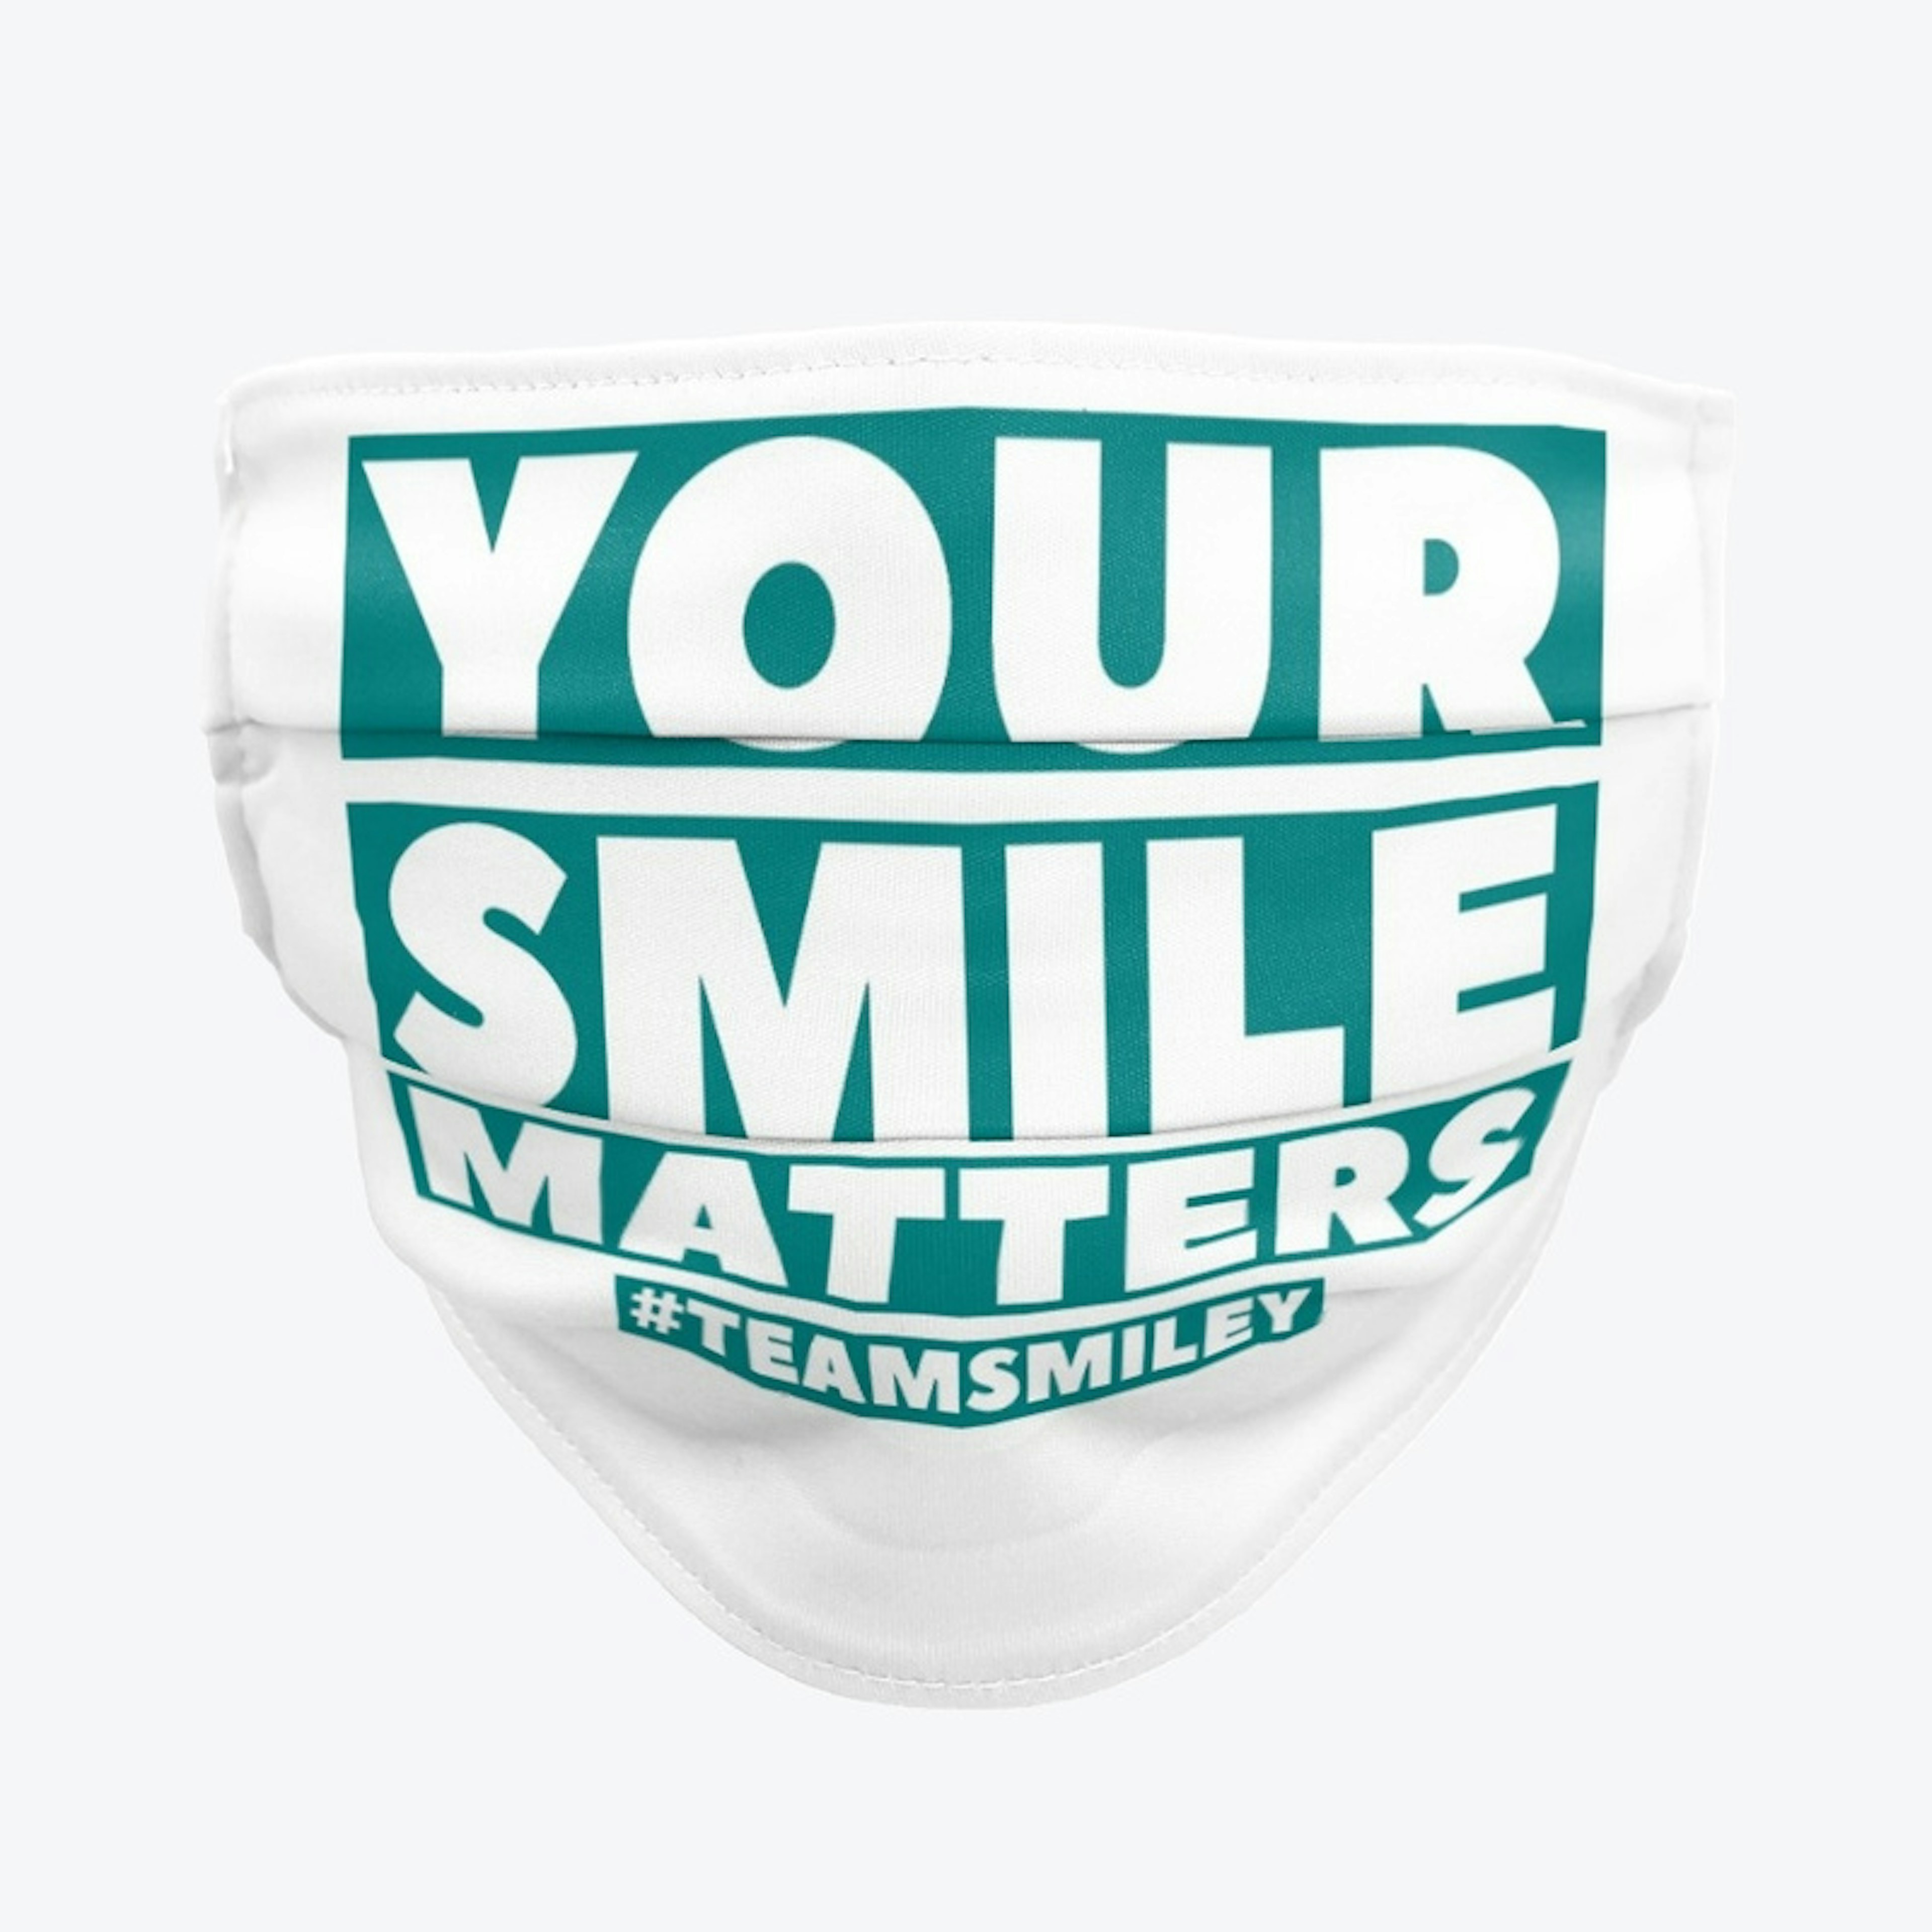 YOUR SMILE MATTERS.